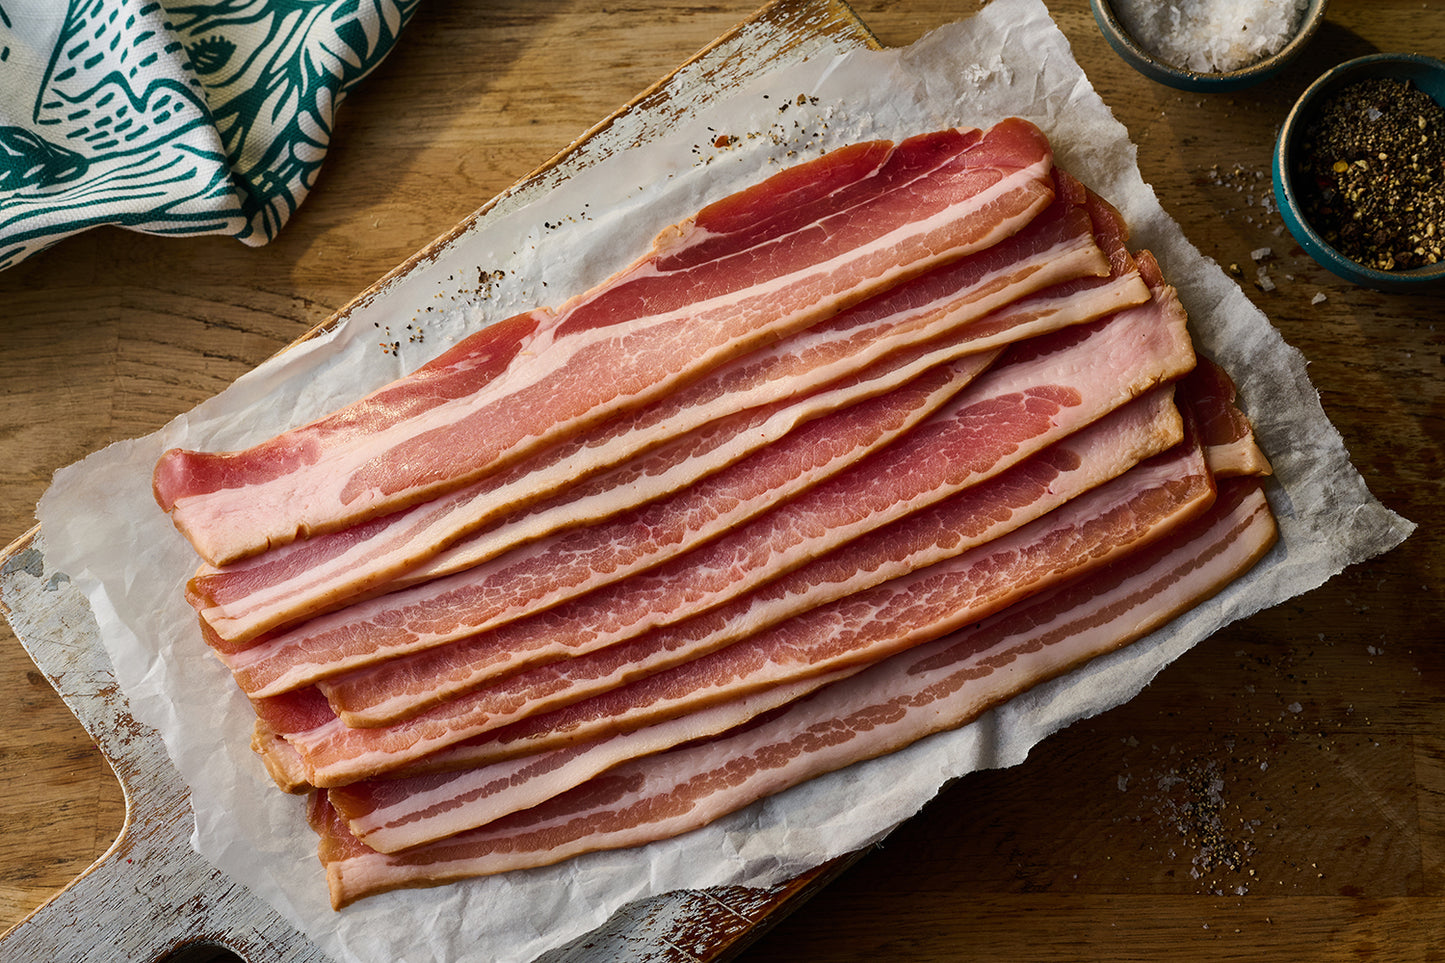 Smoked Dry Cured Streaky Bacon